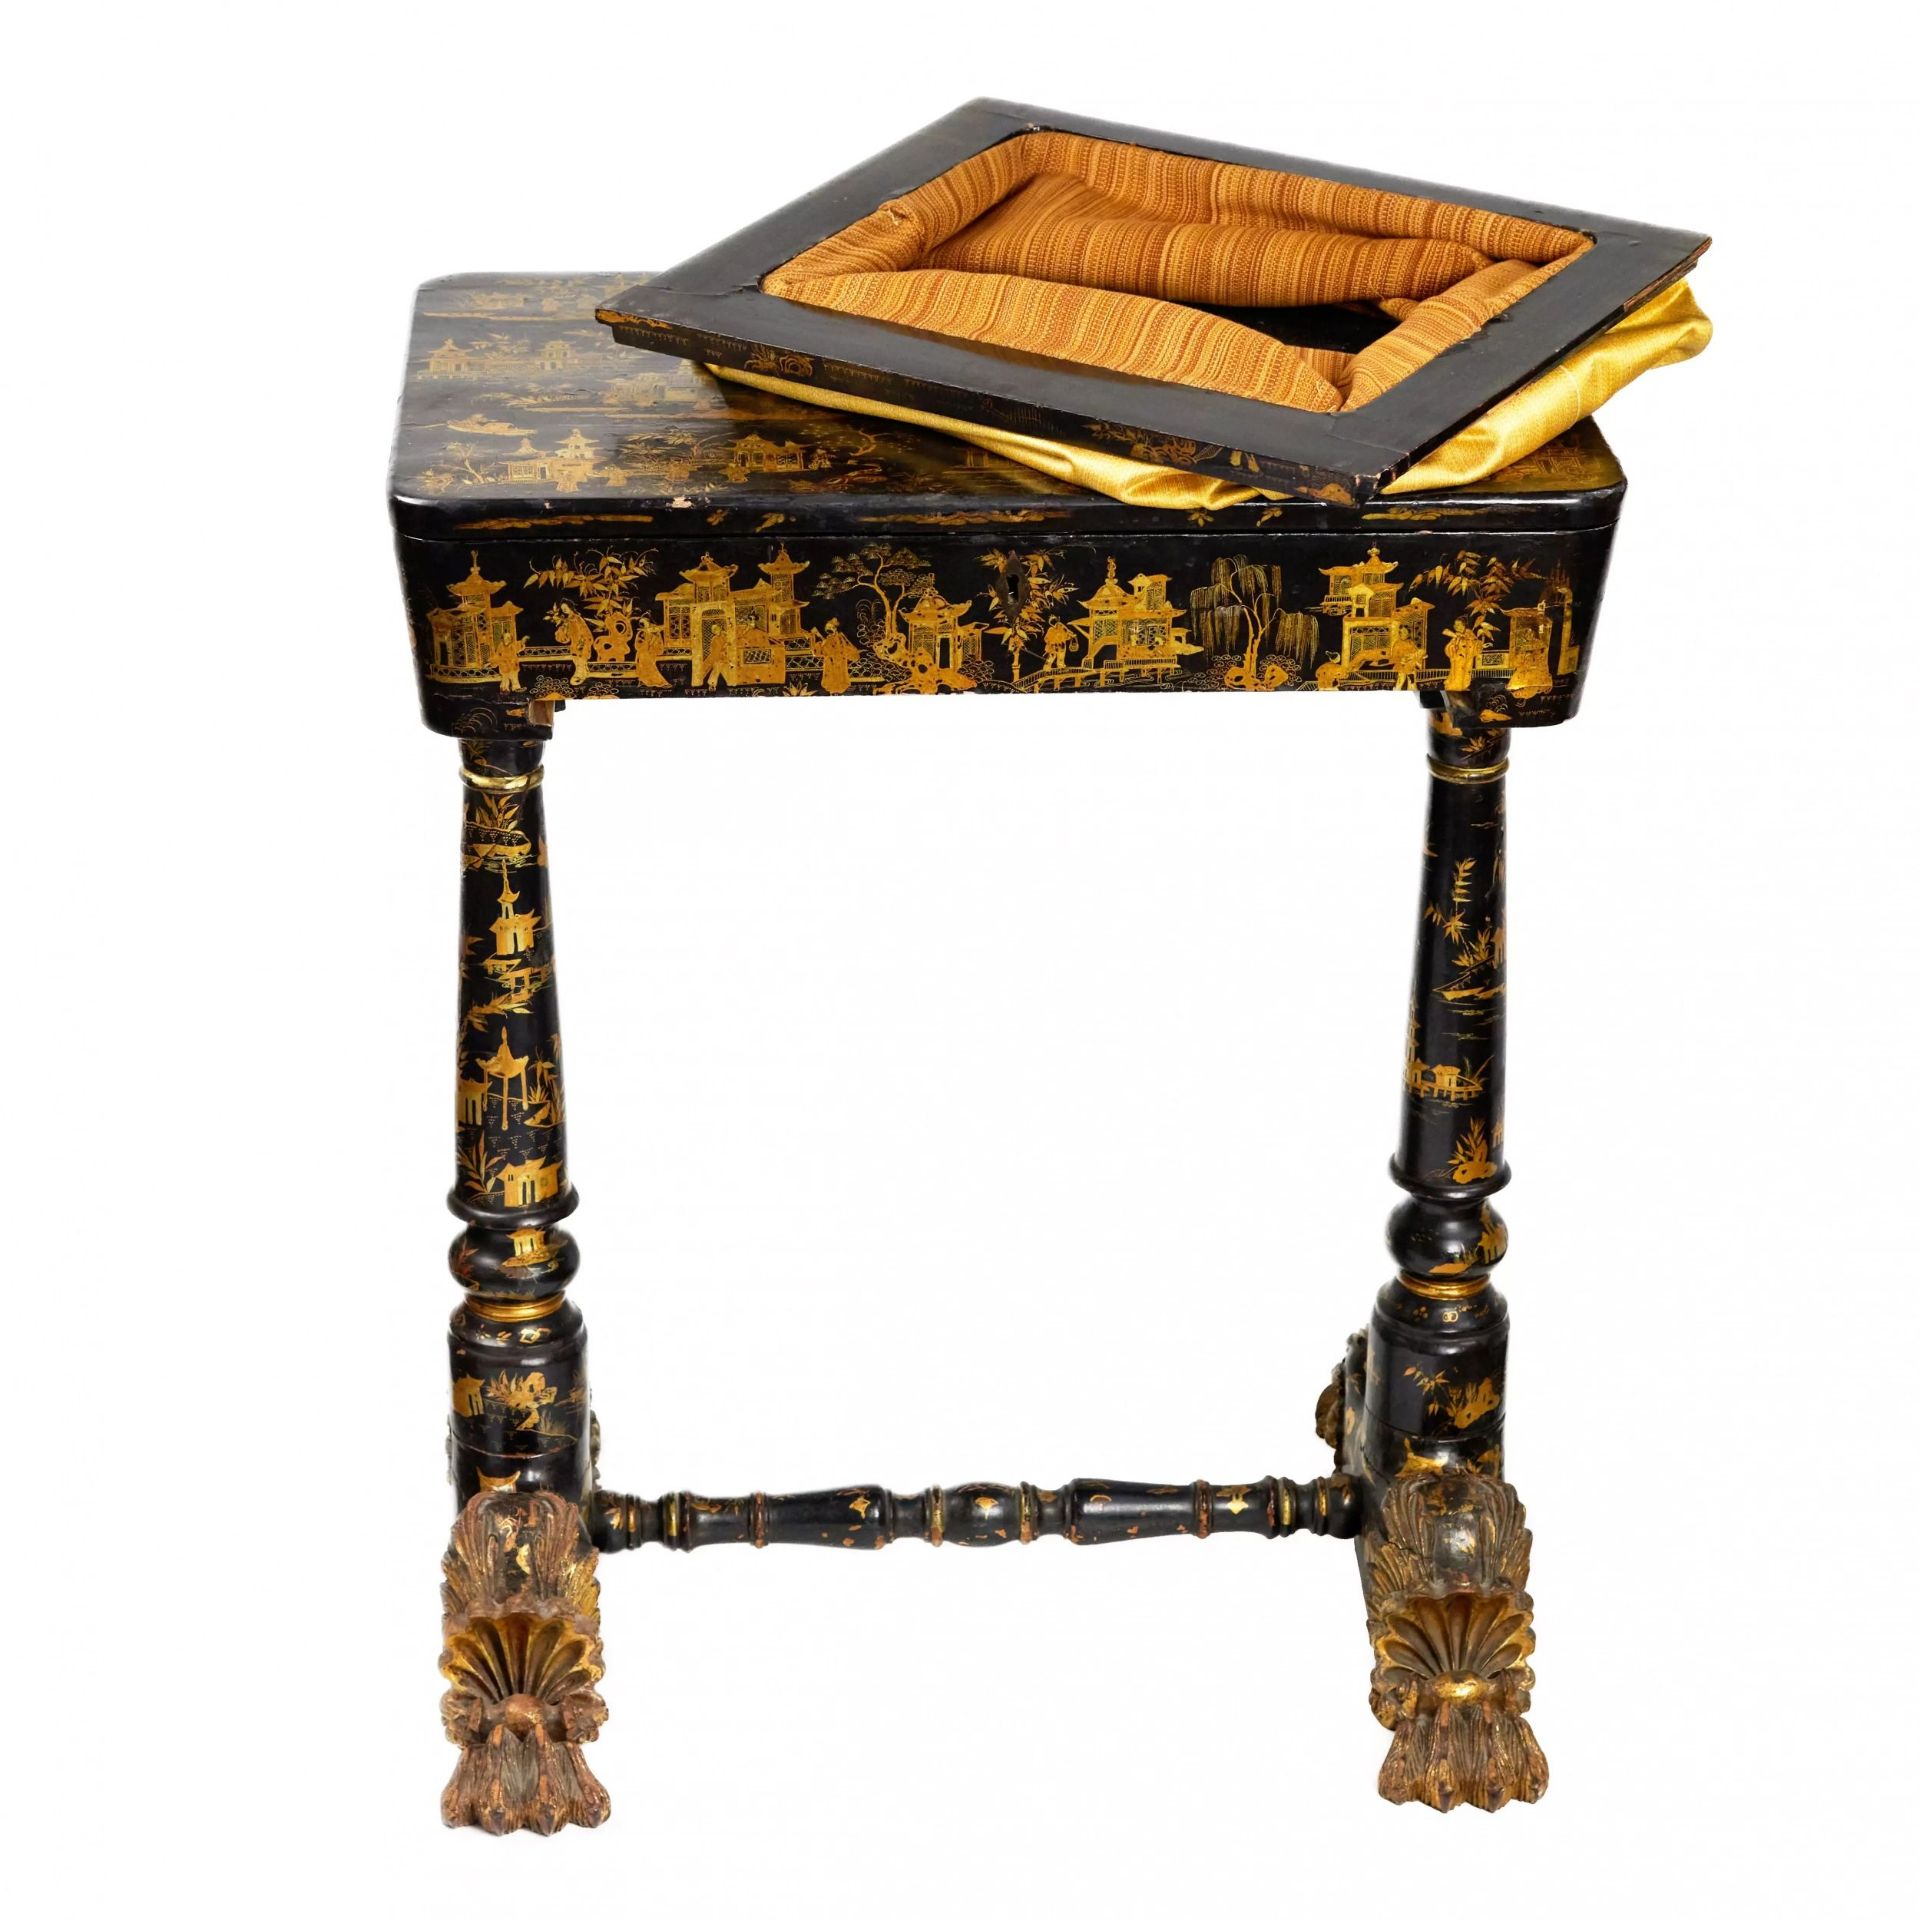 Needlework table made of black and gold Beijing lacquer. 19th century. - Image 7 of 11